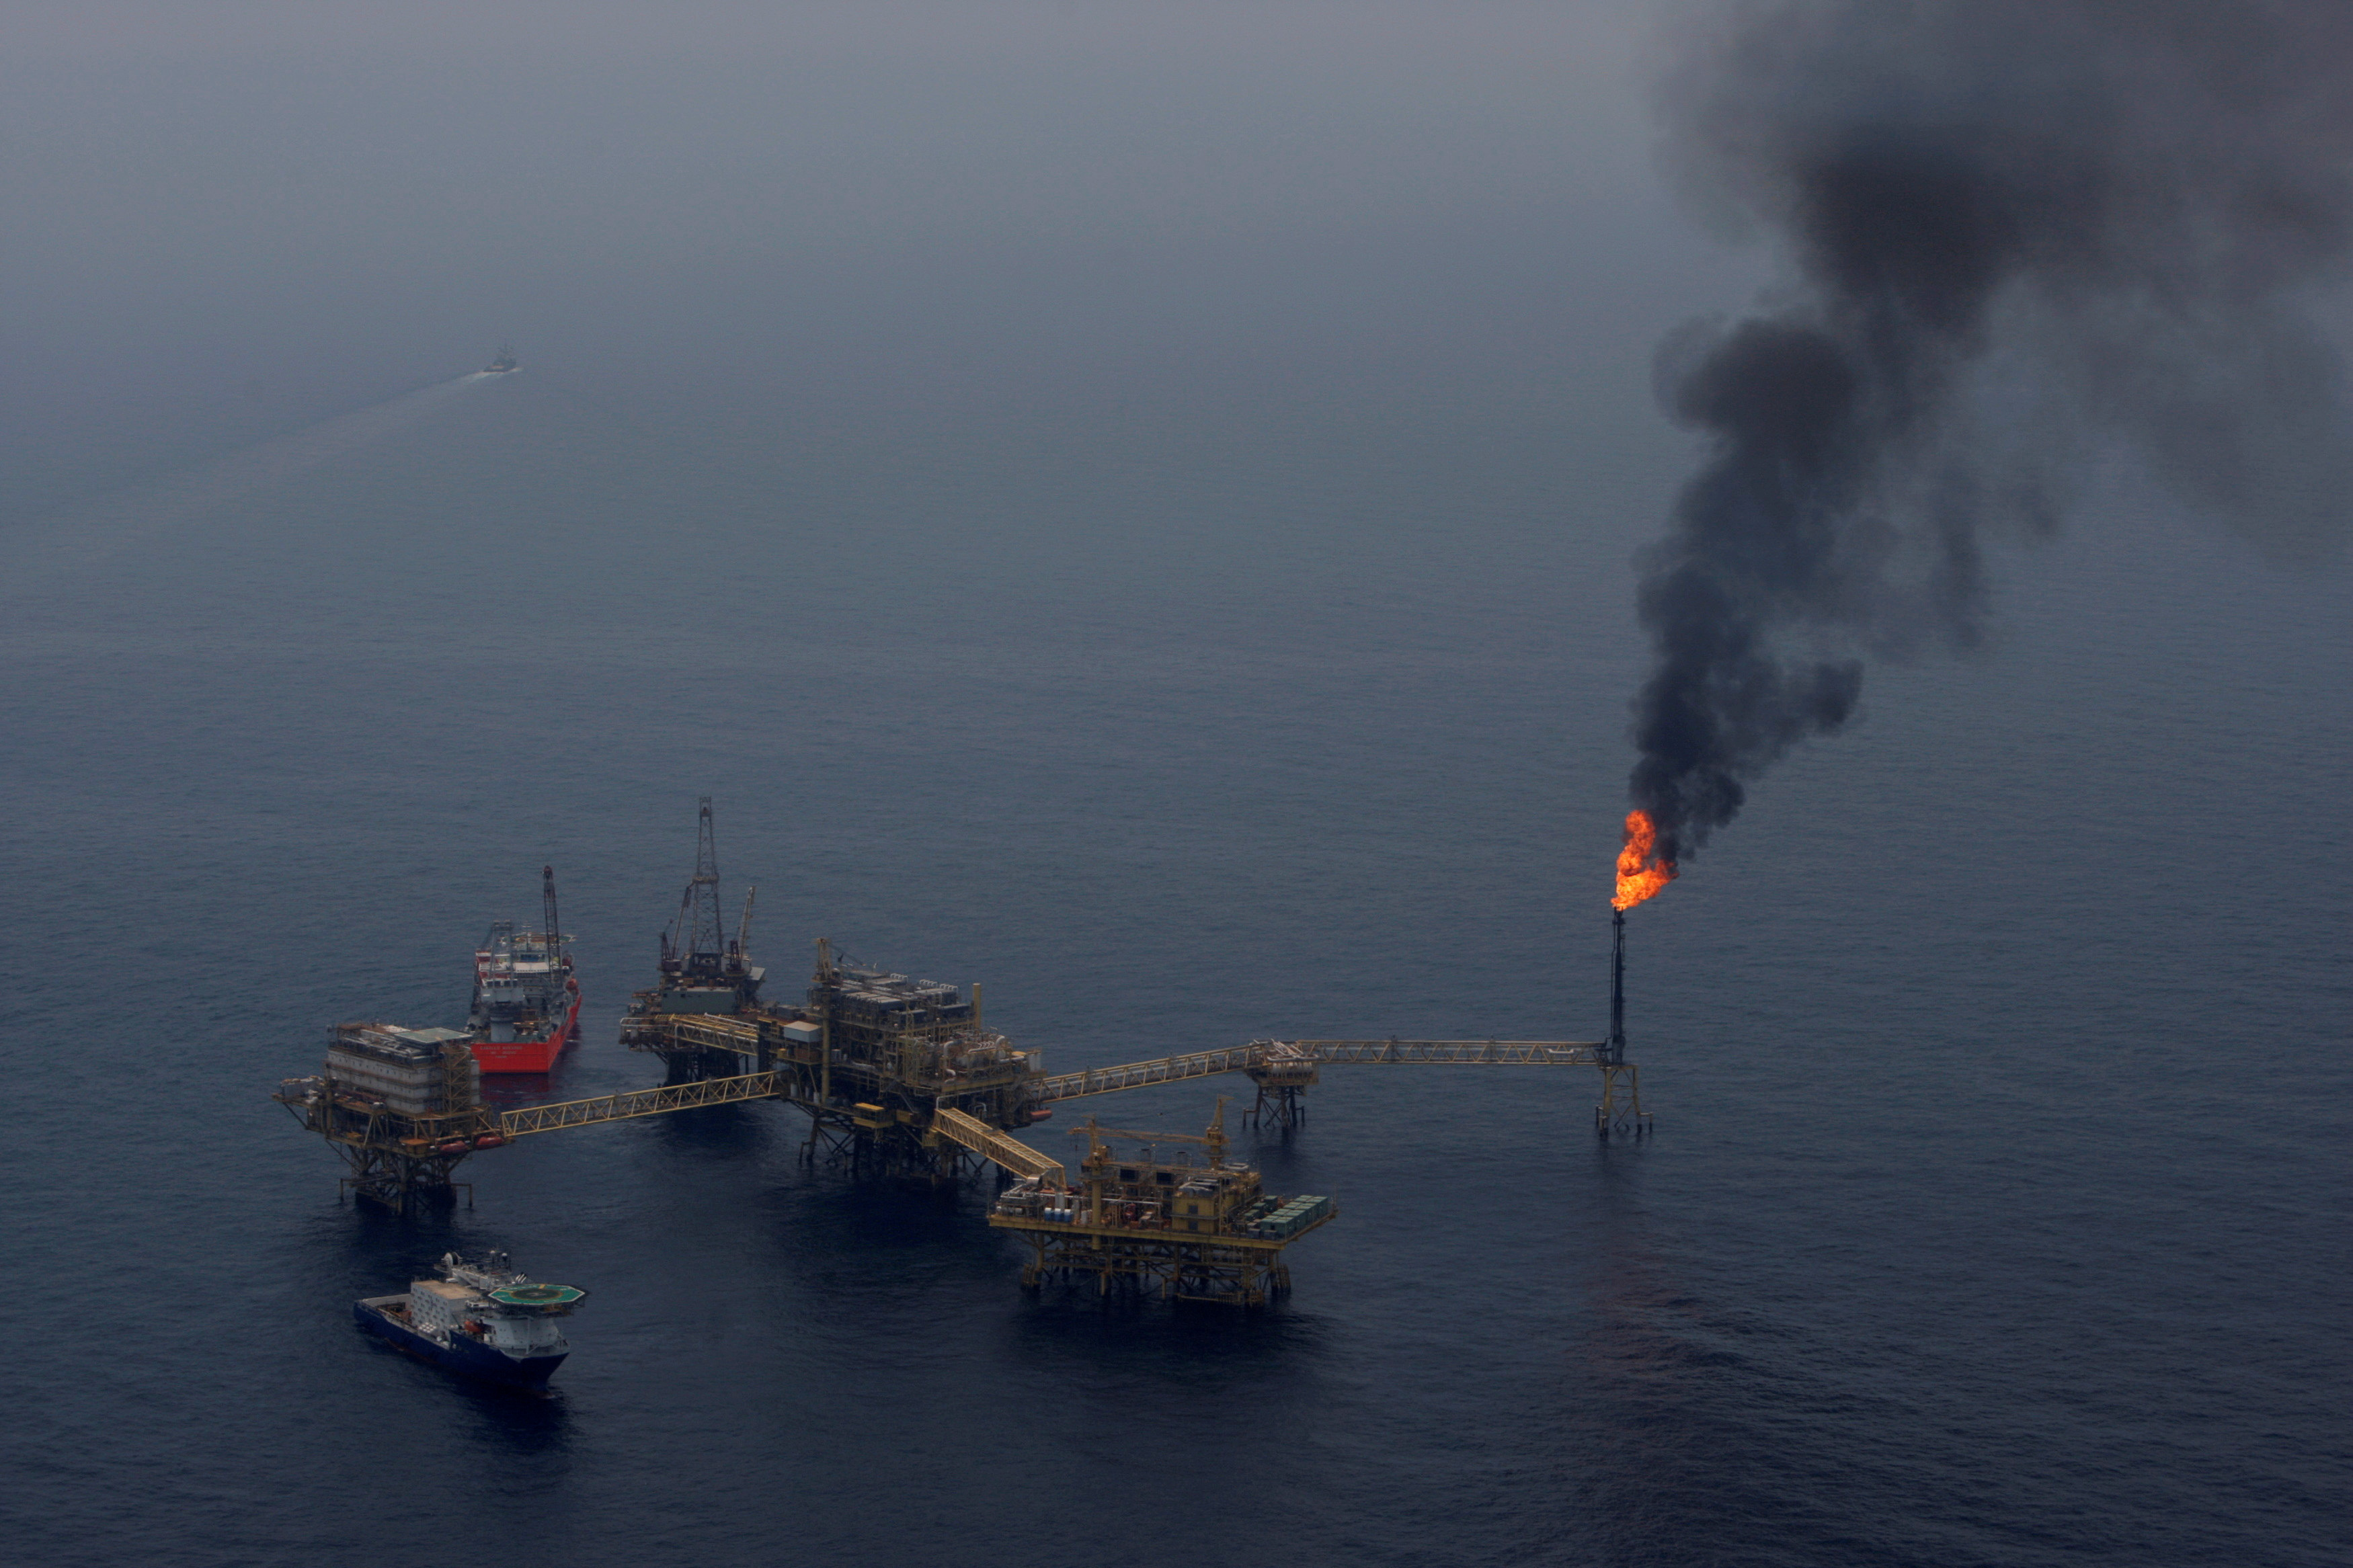 Gas flaring is seen at Mexico's state-run oil monopoly Pemex platform 